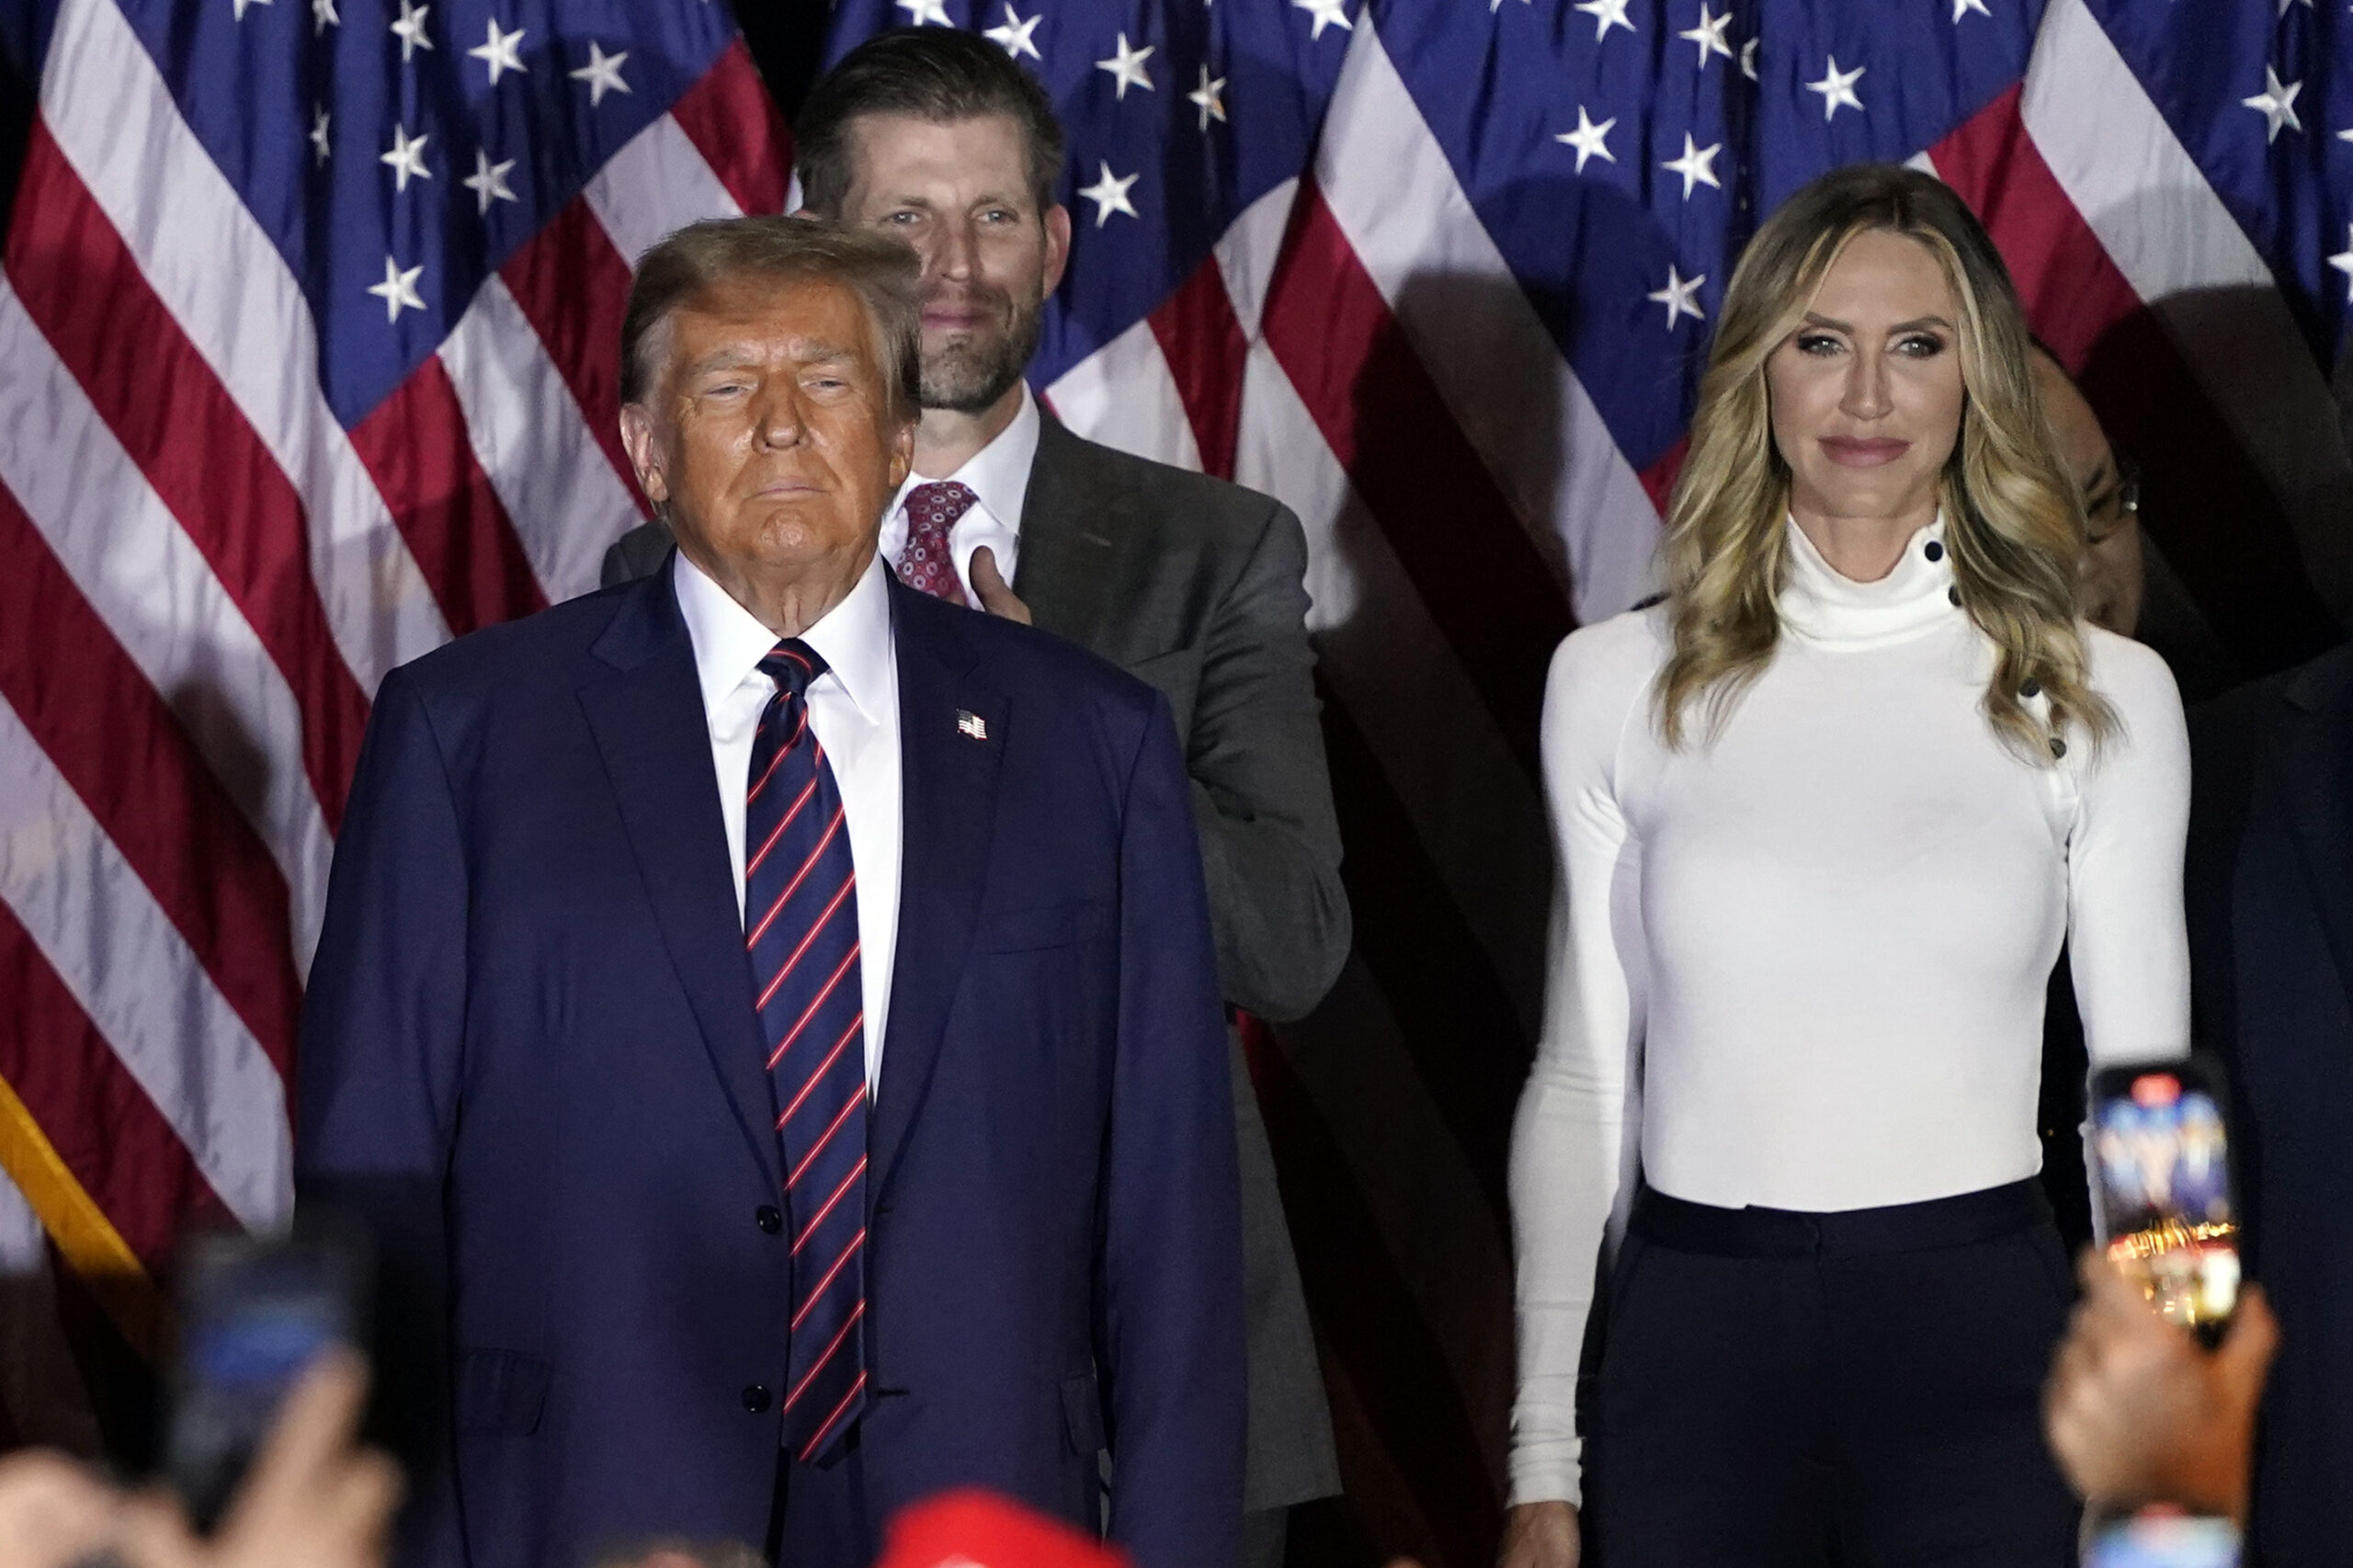 Trump Endorses His Daughter-in-Law for RNC Co-Chair: ‘Very Talented’